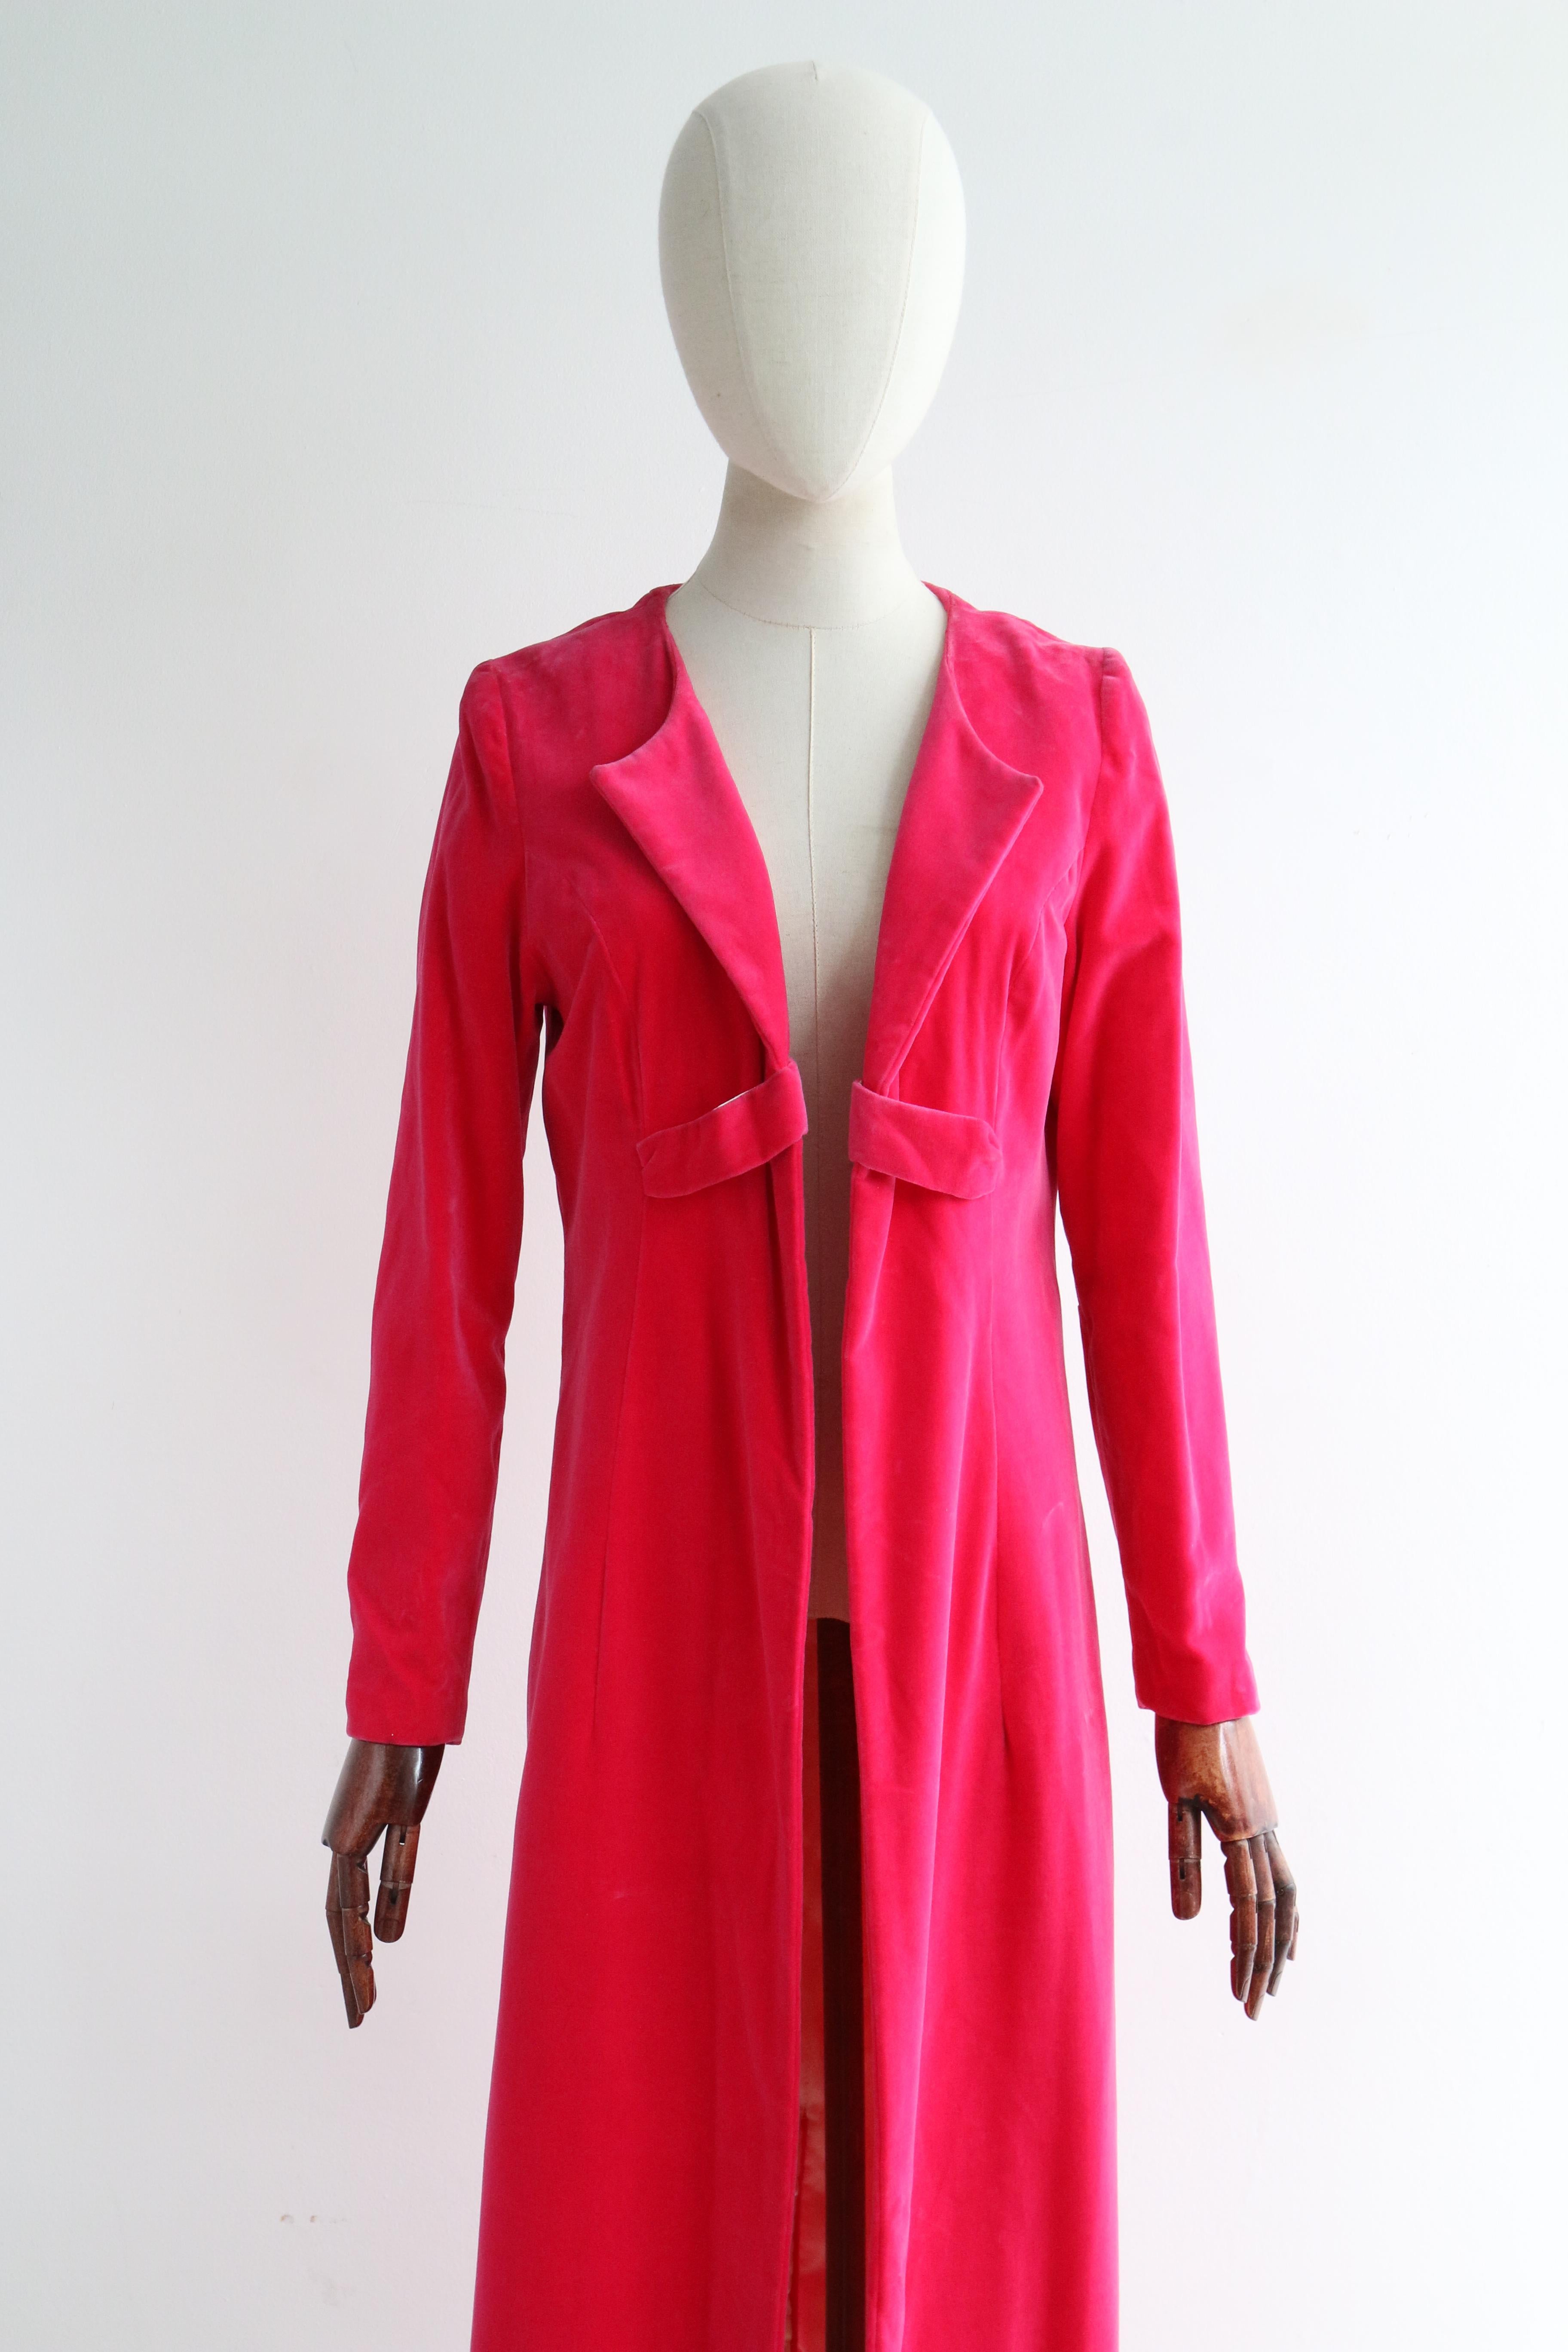 This truly vibrant 1960's Schiaparelli pink velvet evening coat, lined in cream rayon satin, is just the statement piece for your wardrobe.  

The open cut neckline of the coat is framed by curved pointed lapels that join the front of the